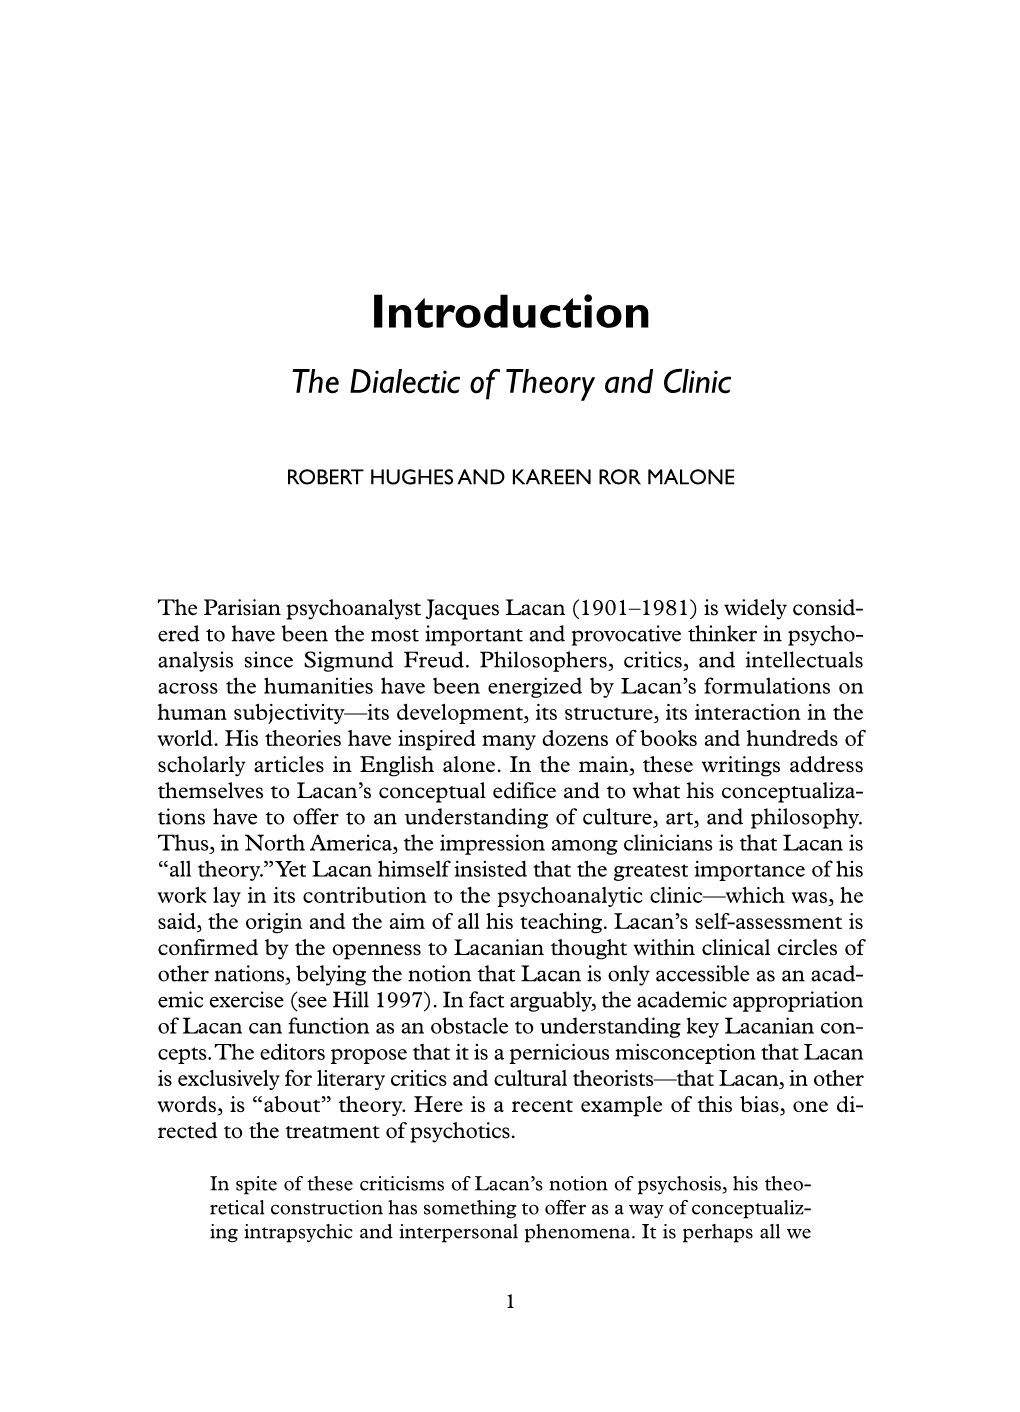 Introduction the Dialectic of Theory and Clinic